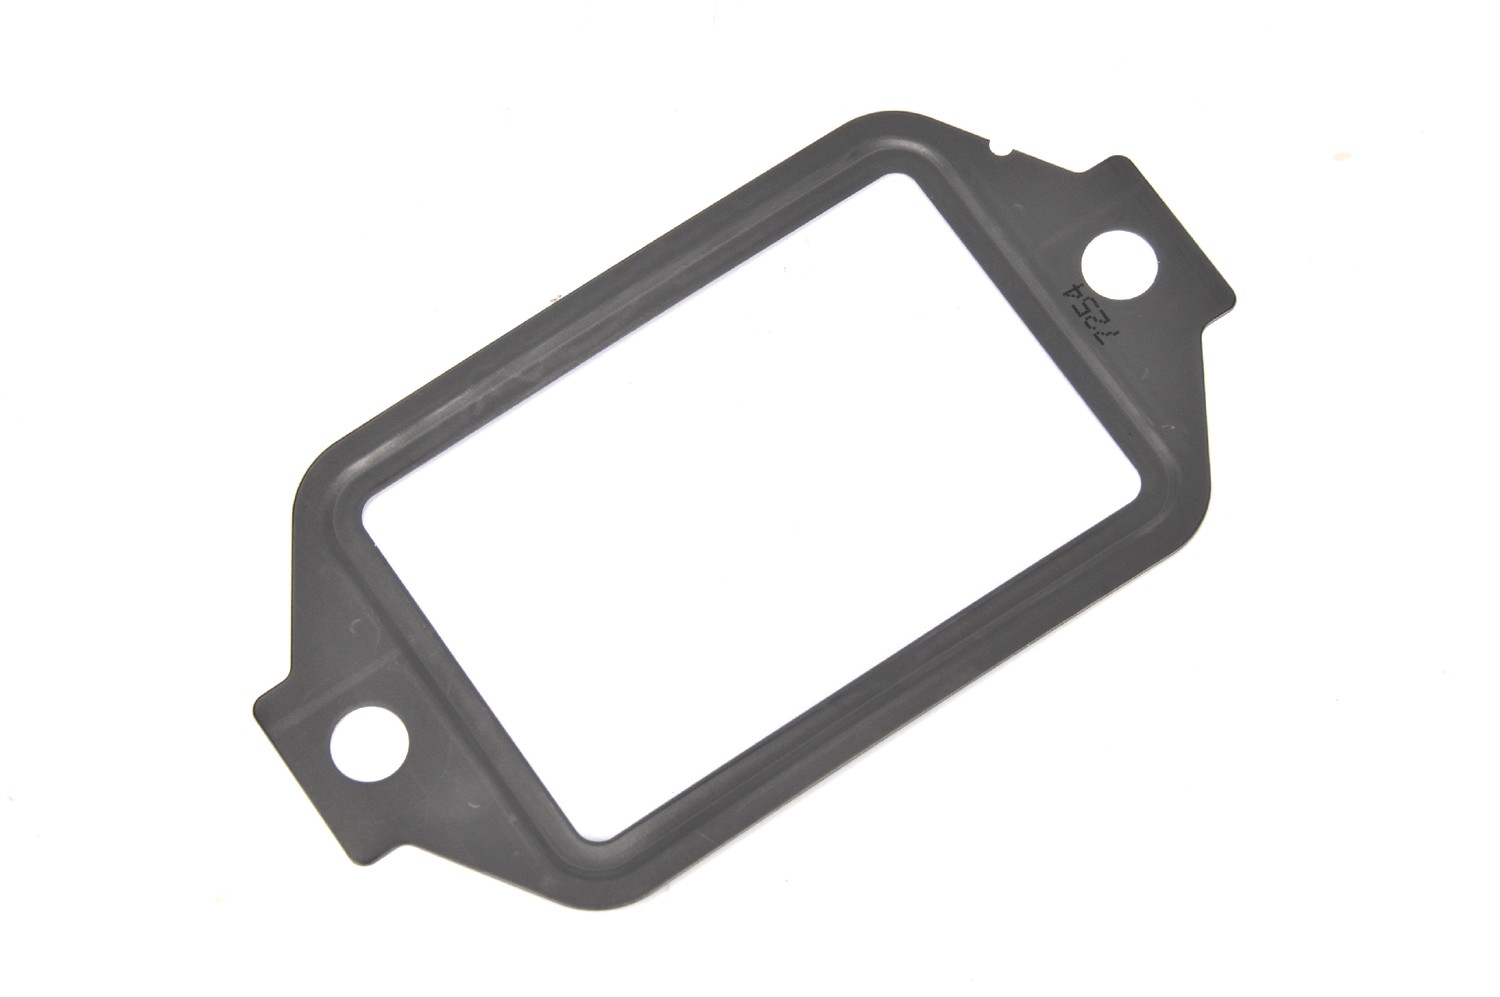 GM GENUINE PARTS - Engine Oil Cooler Adapter Seal - GMP 12647254